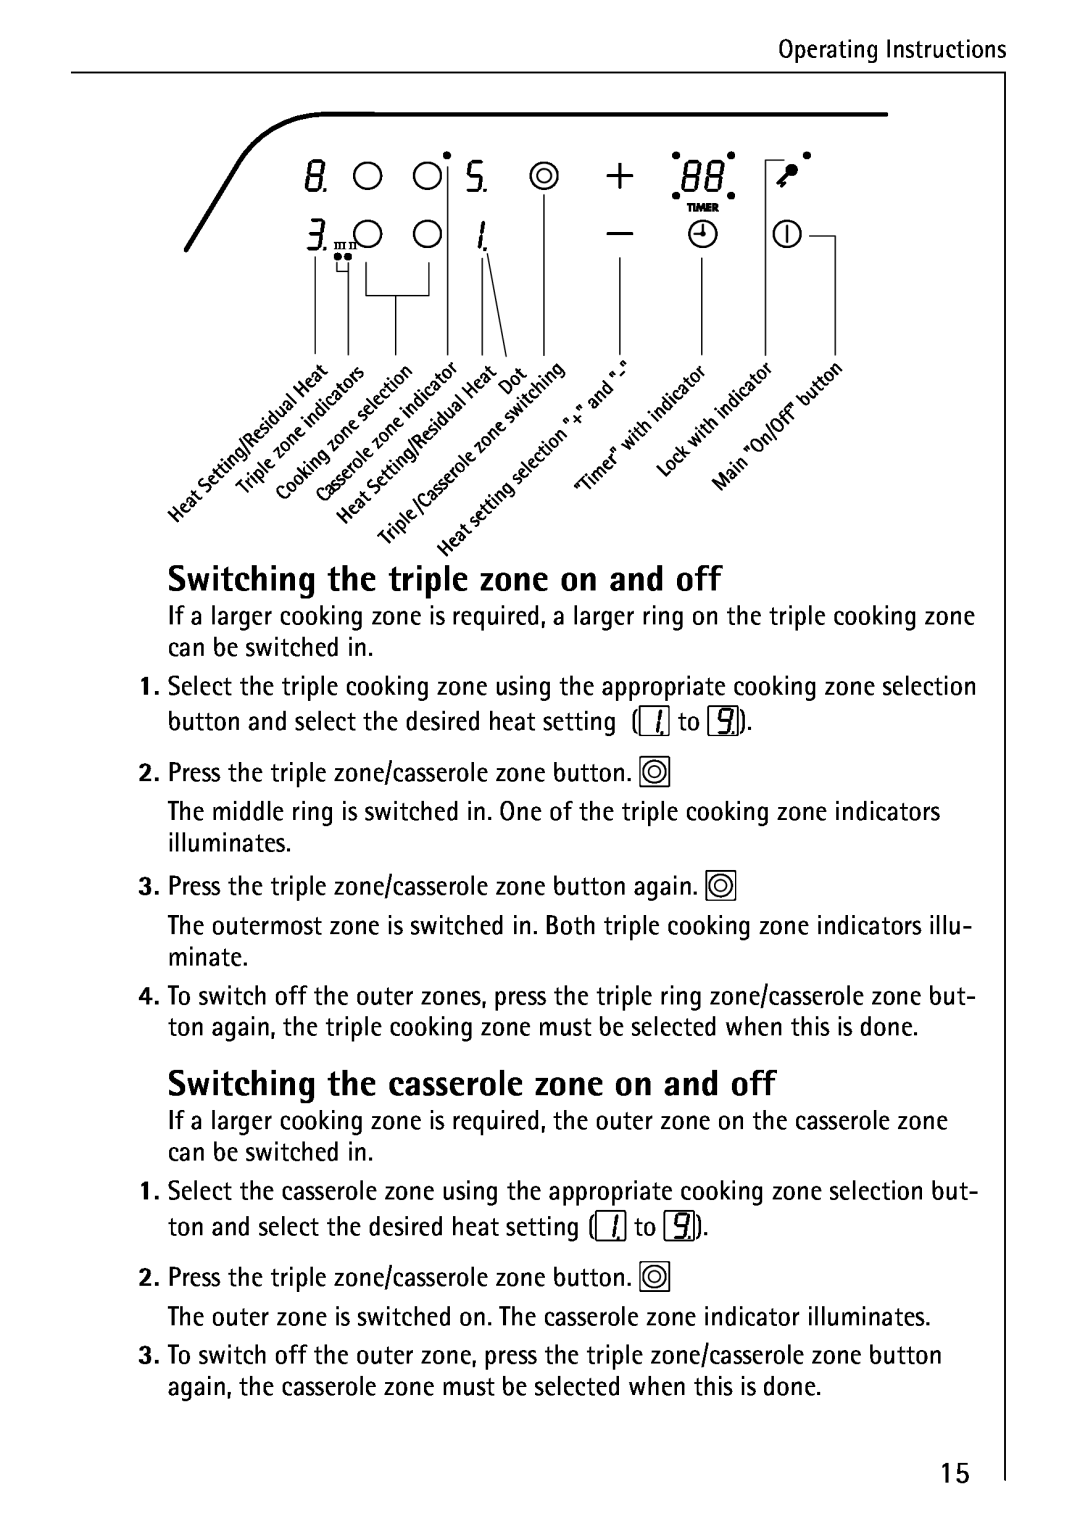 Electrolux 65300KF-an operating instructions Switching the triple zone on and off, Switching the casserole zone on and off 